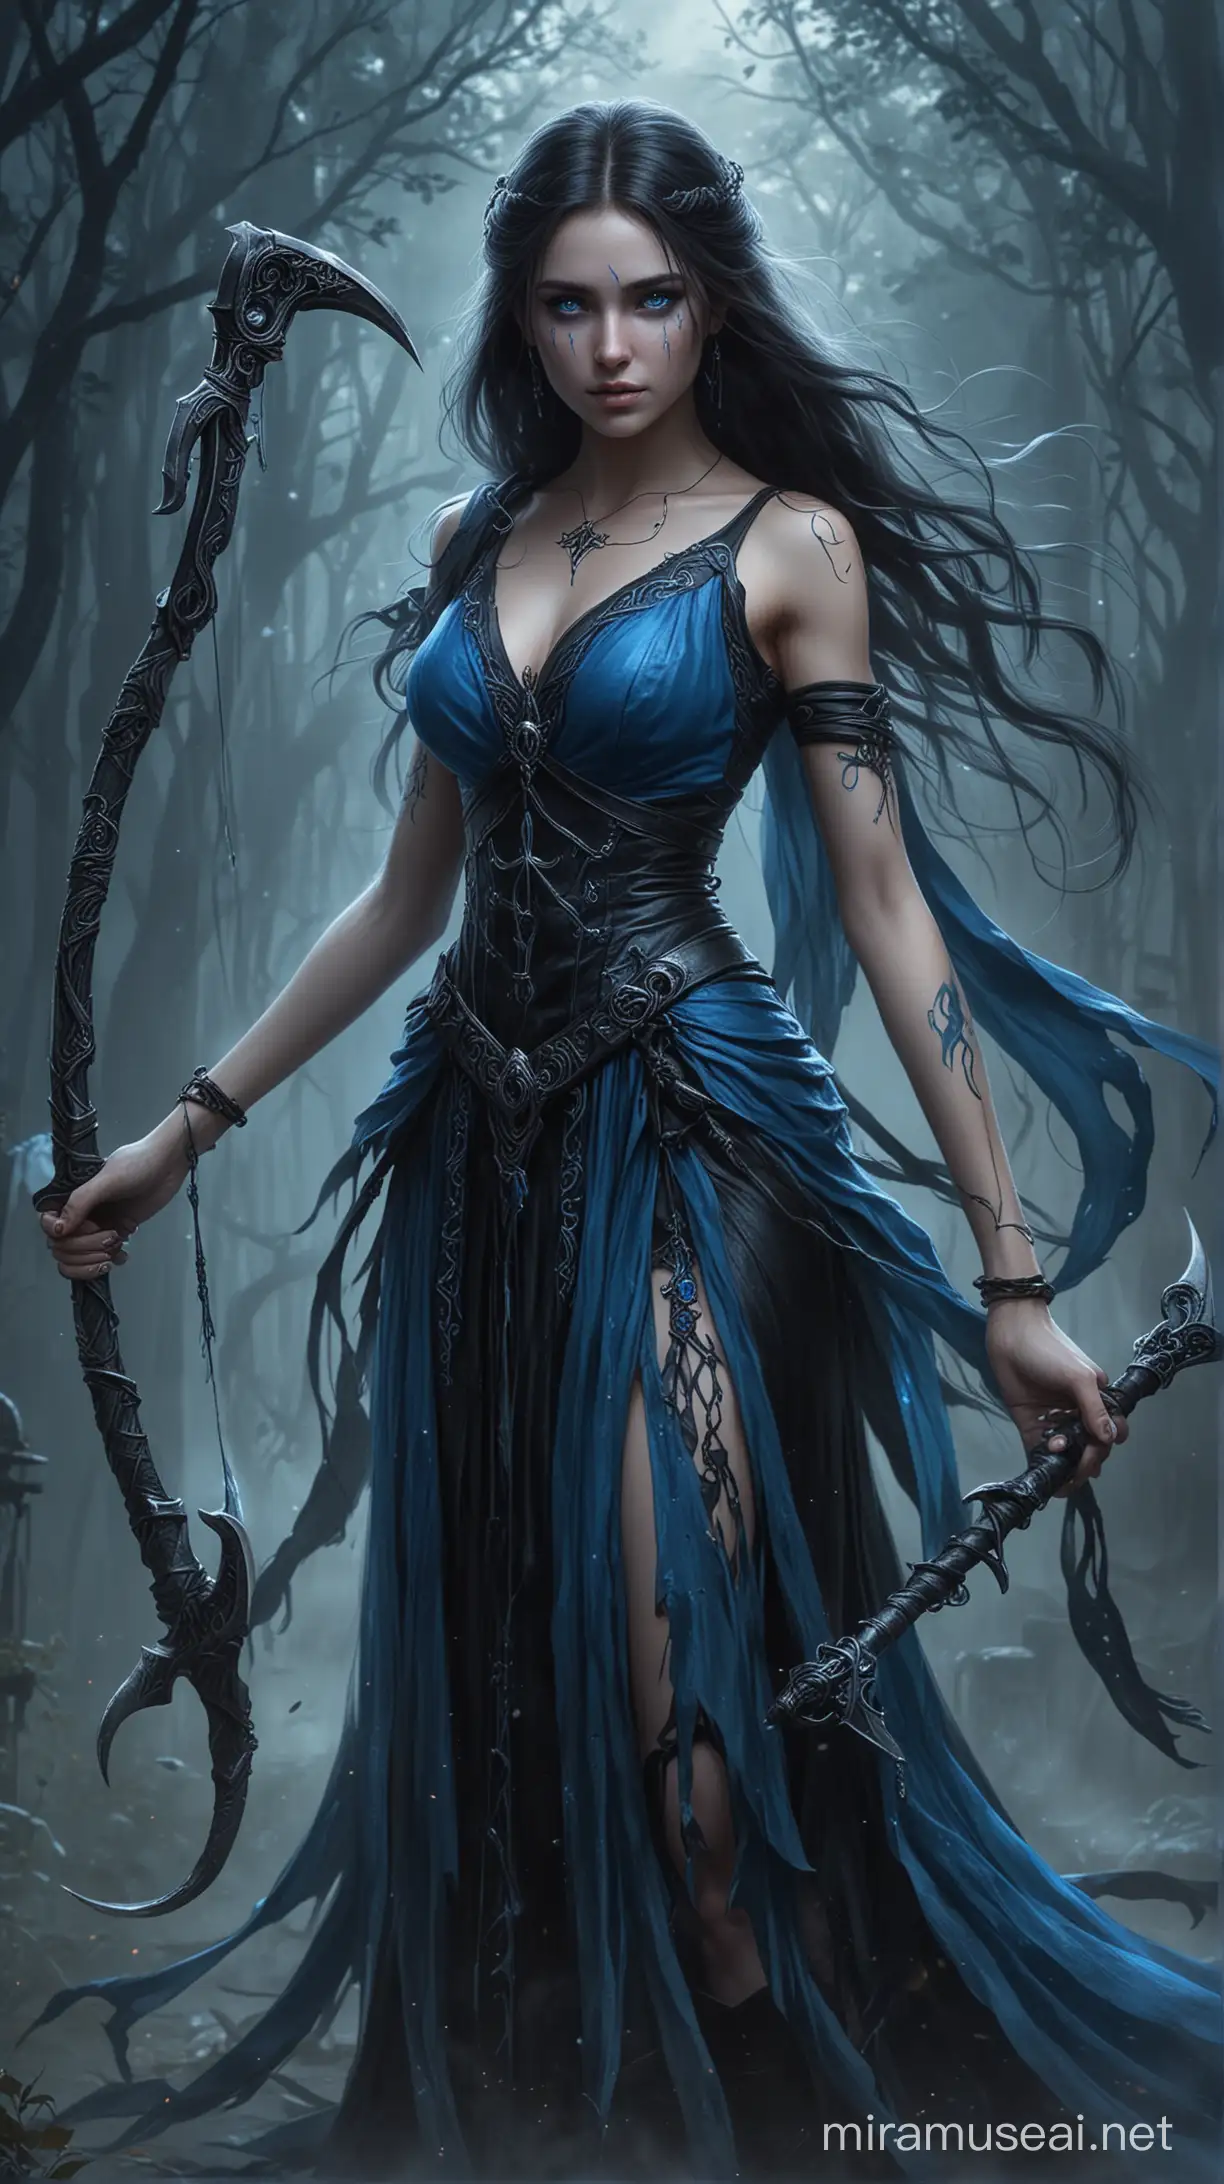 Bringer of death. She is beautiful. She  wears an blue and black dress. She holds a scythe. She has runes on her scythe and face. She has glowing blue magic around. She has glowing blue misty eyes. 